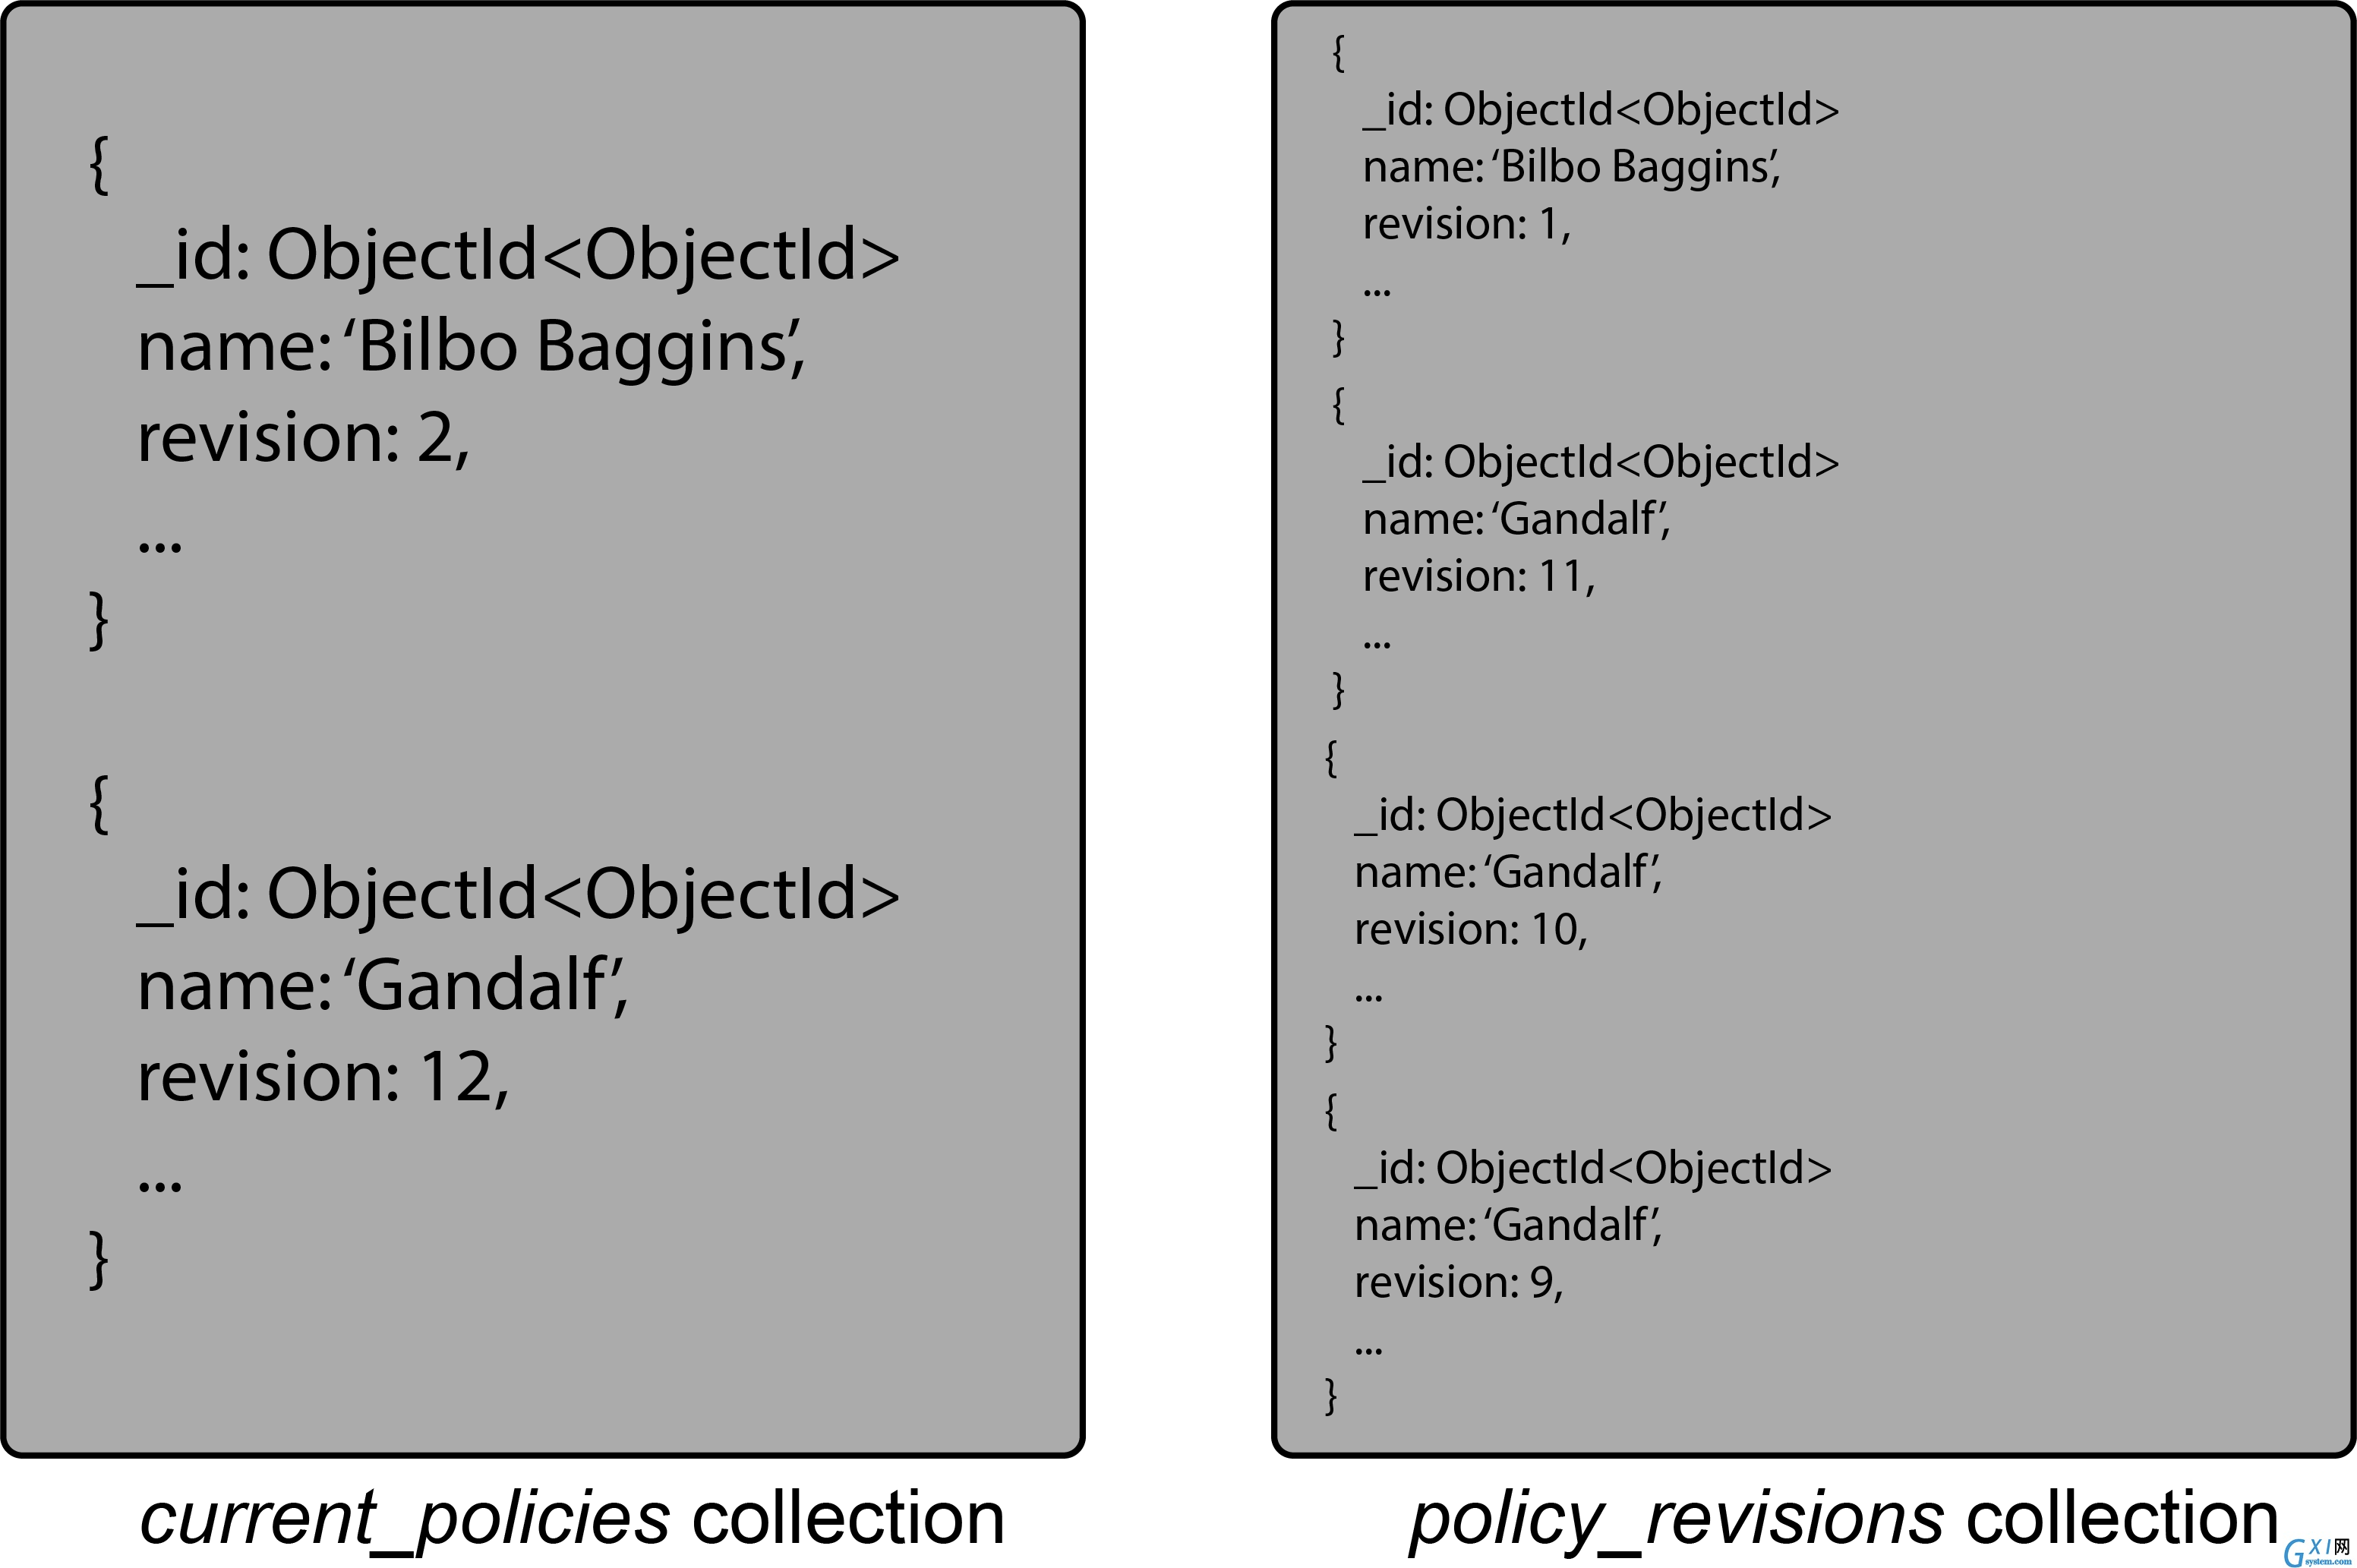 Policy Revisions and Current Policy Collections